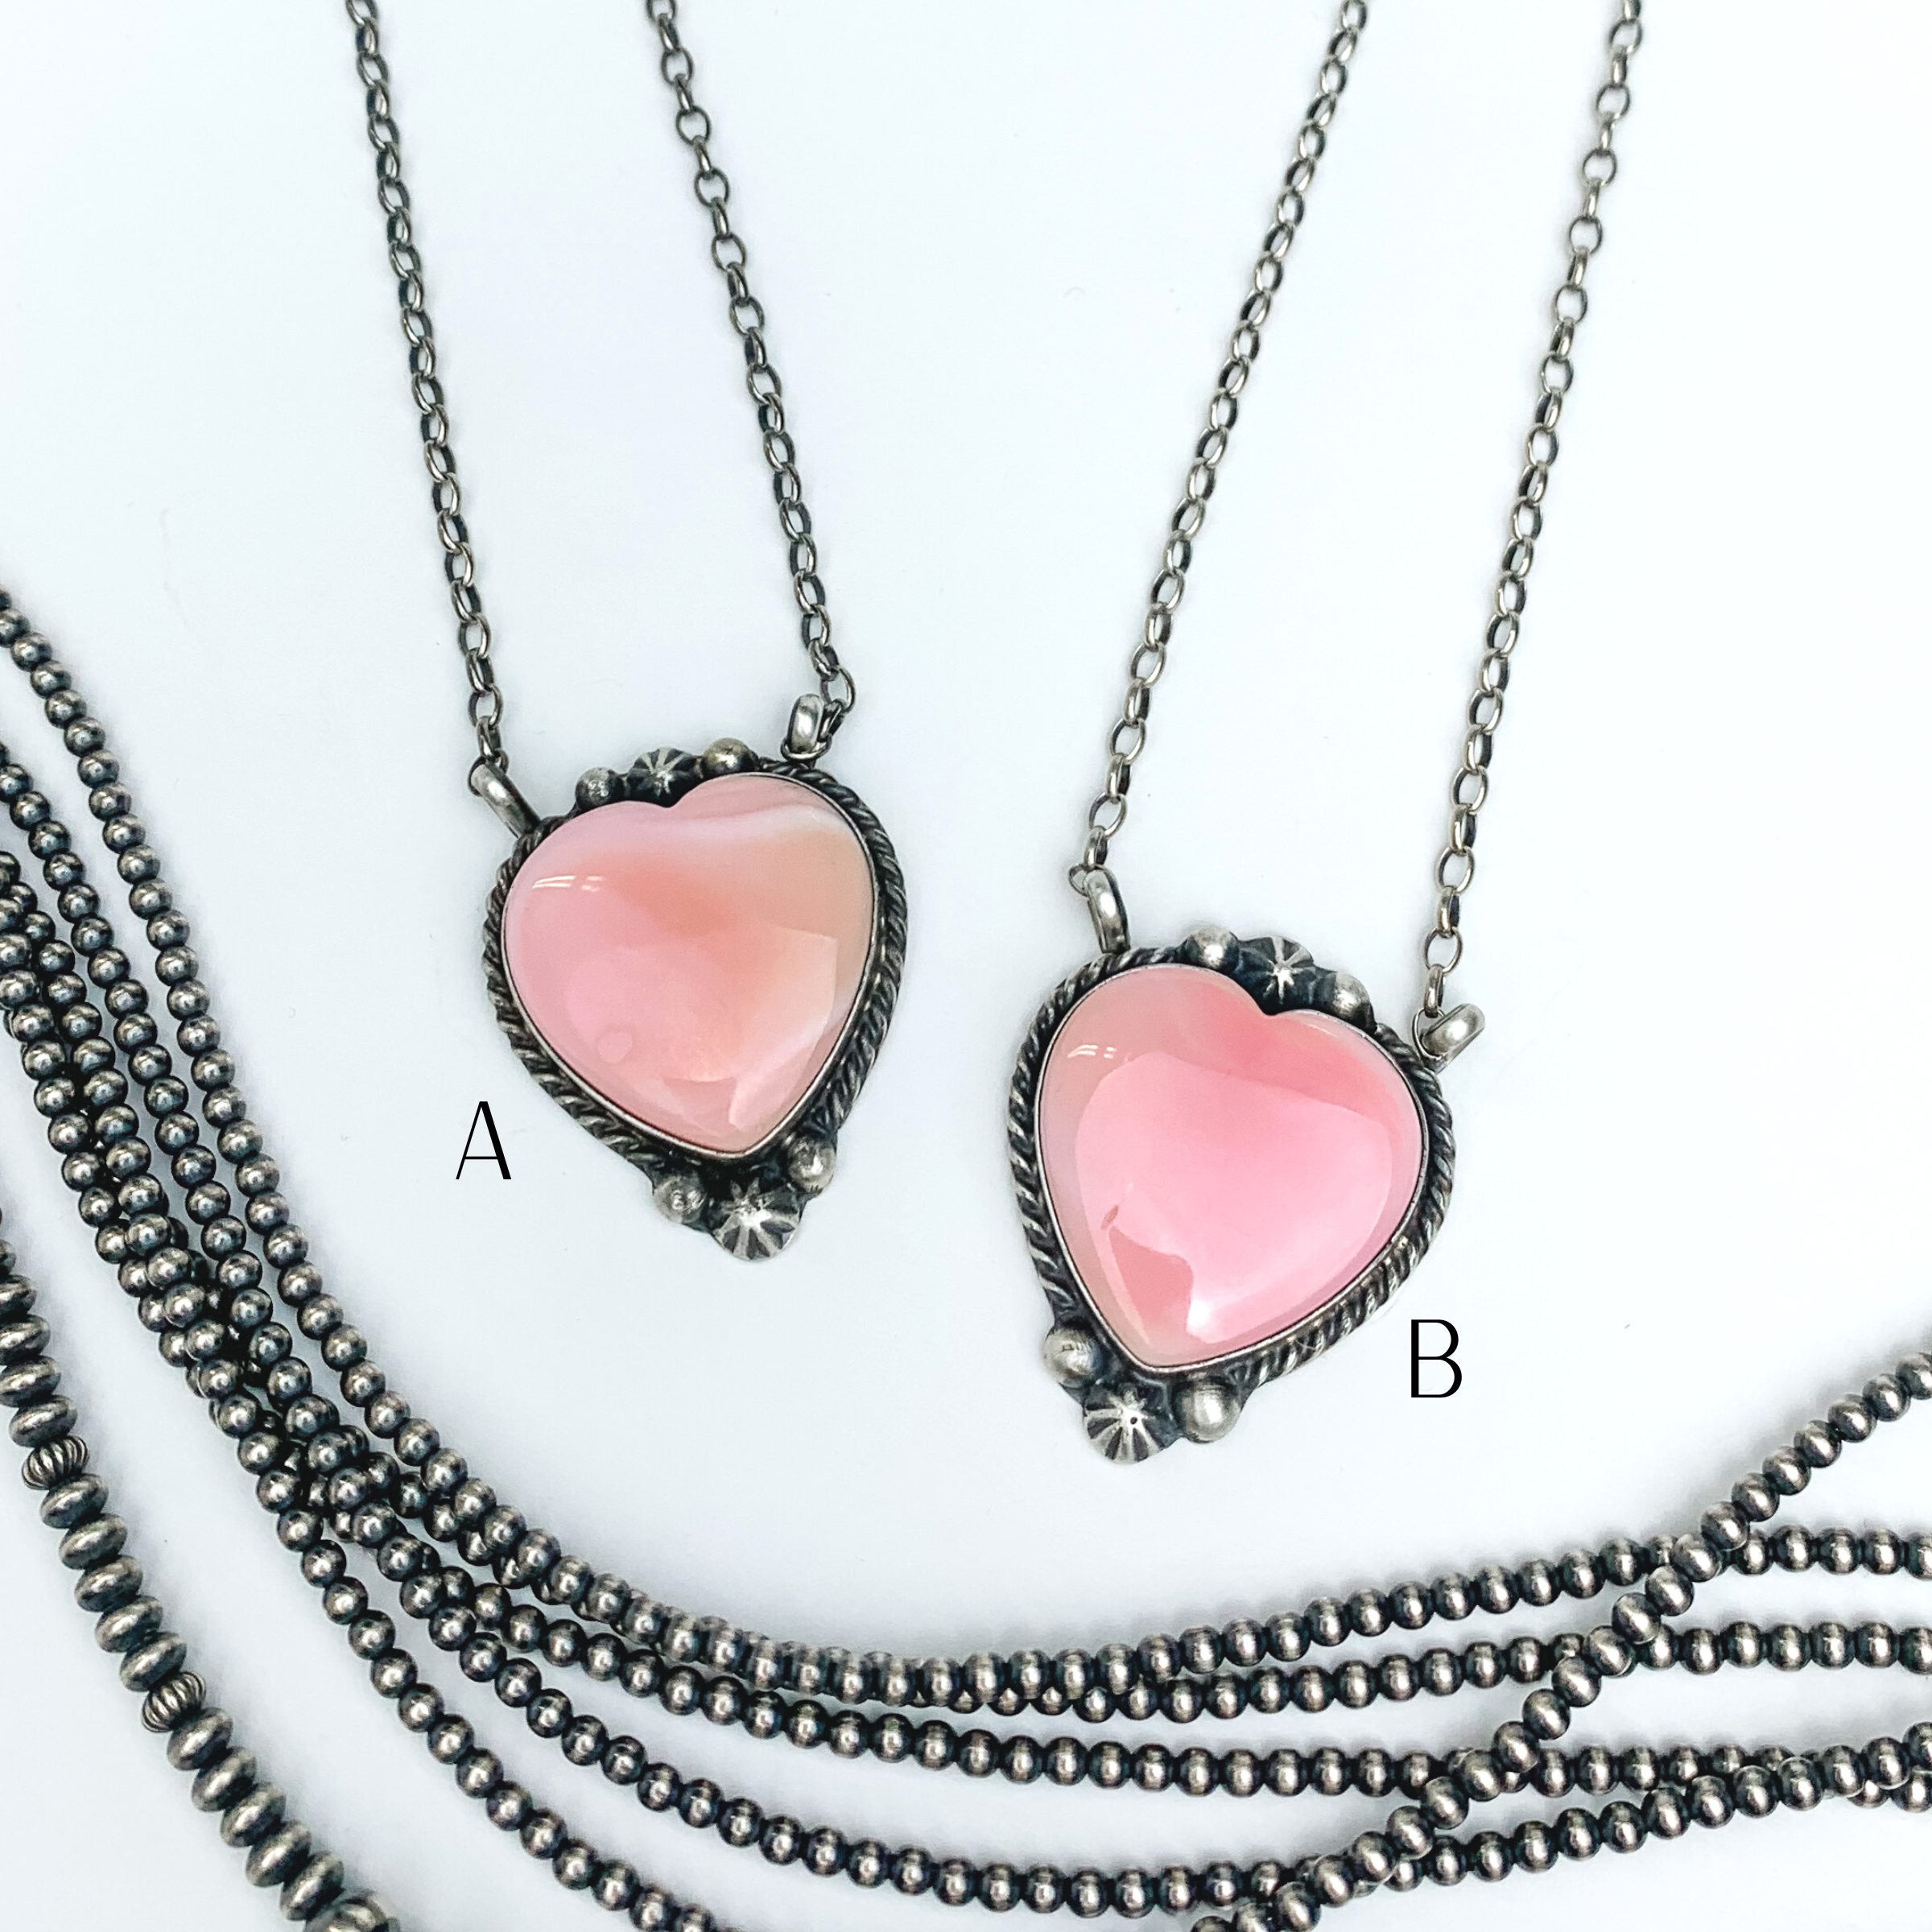 Augustine Largo | Navajo Handmade Sterling Silver Chain Necklace with Large Pink Conch Heart Pendant - Giddy Up Glamour Boutique